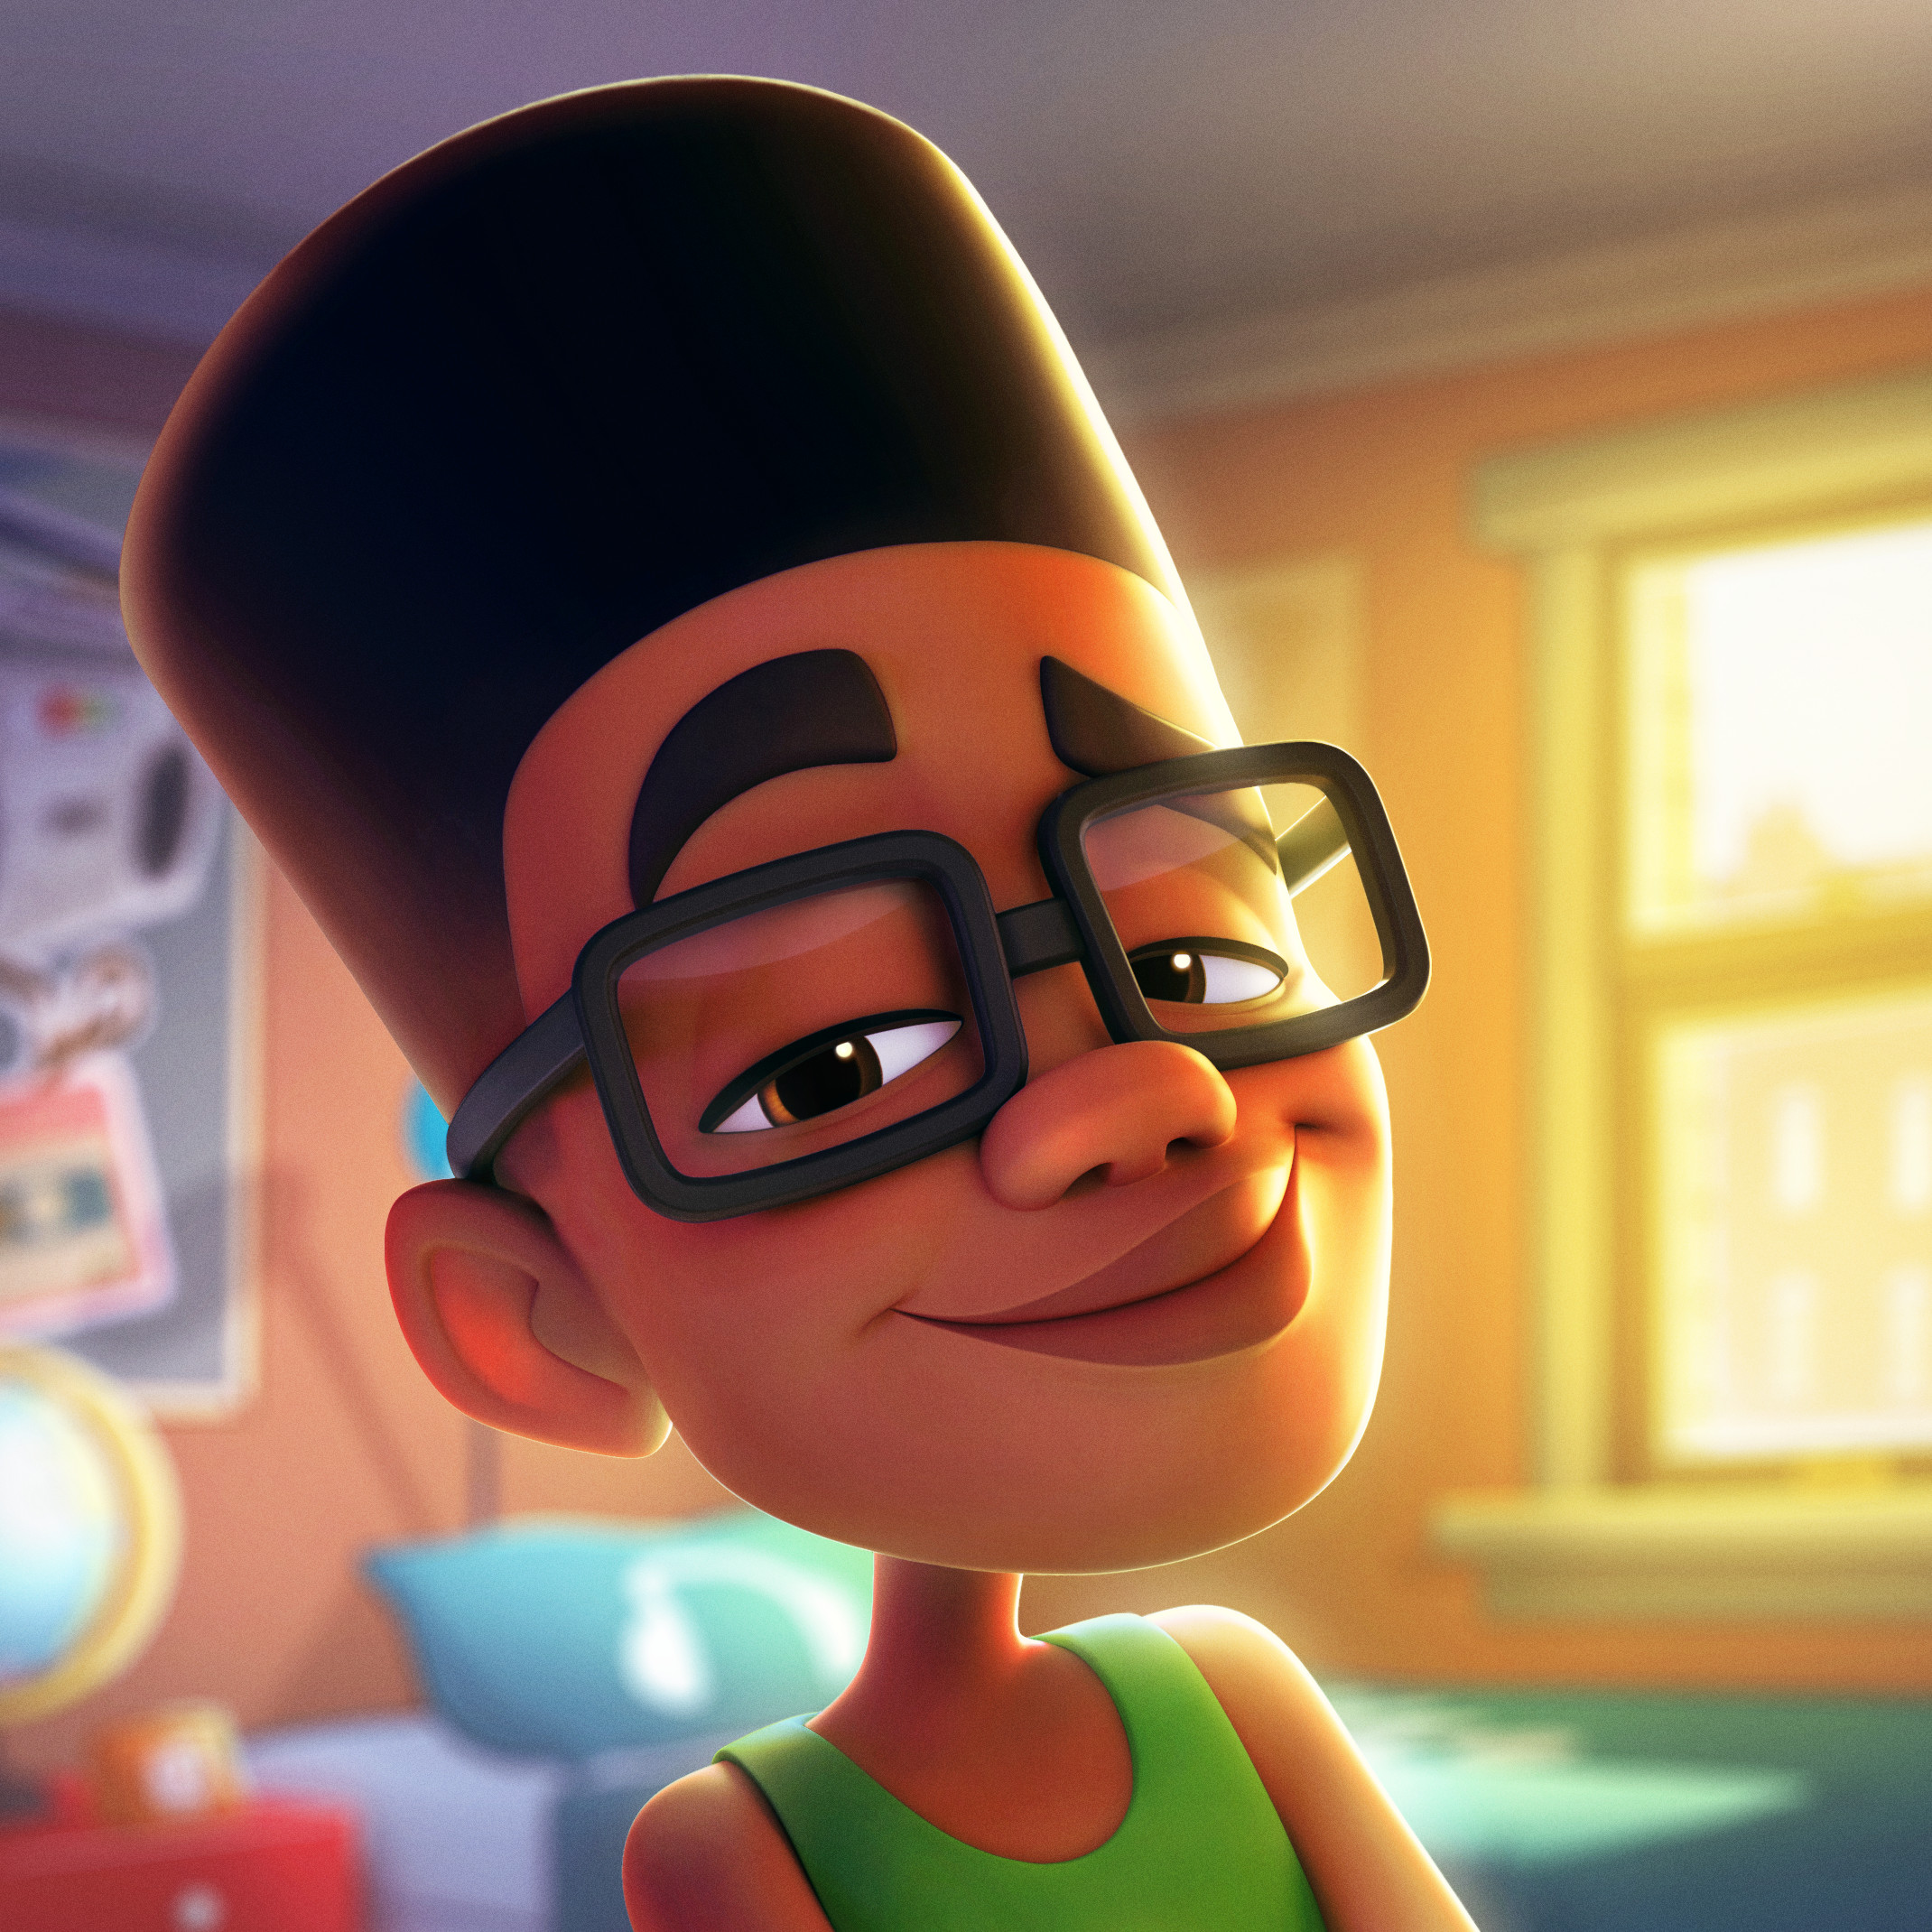 tommykinnerup - Character Designs for Subway Surfers The Animated